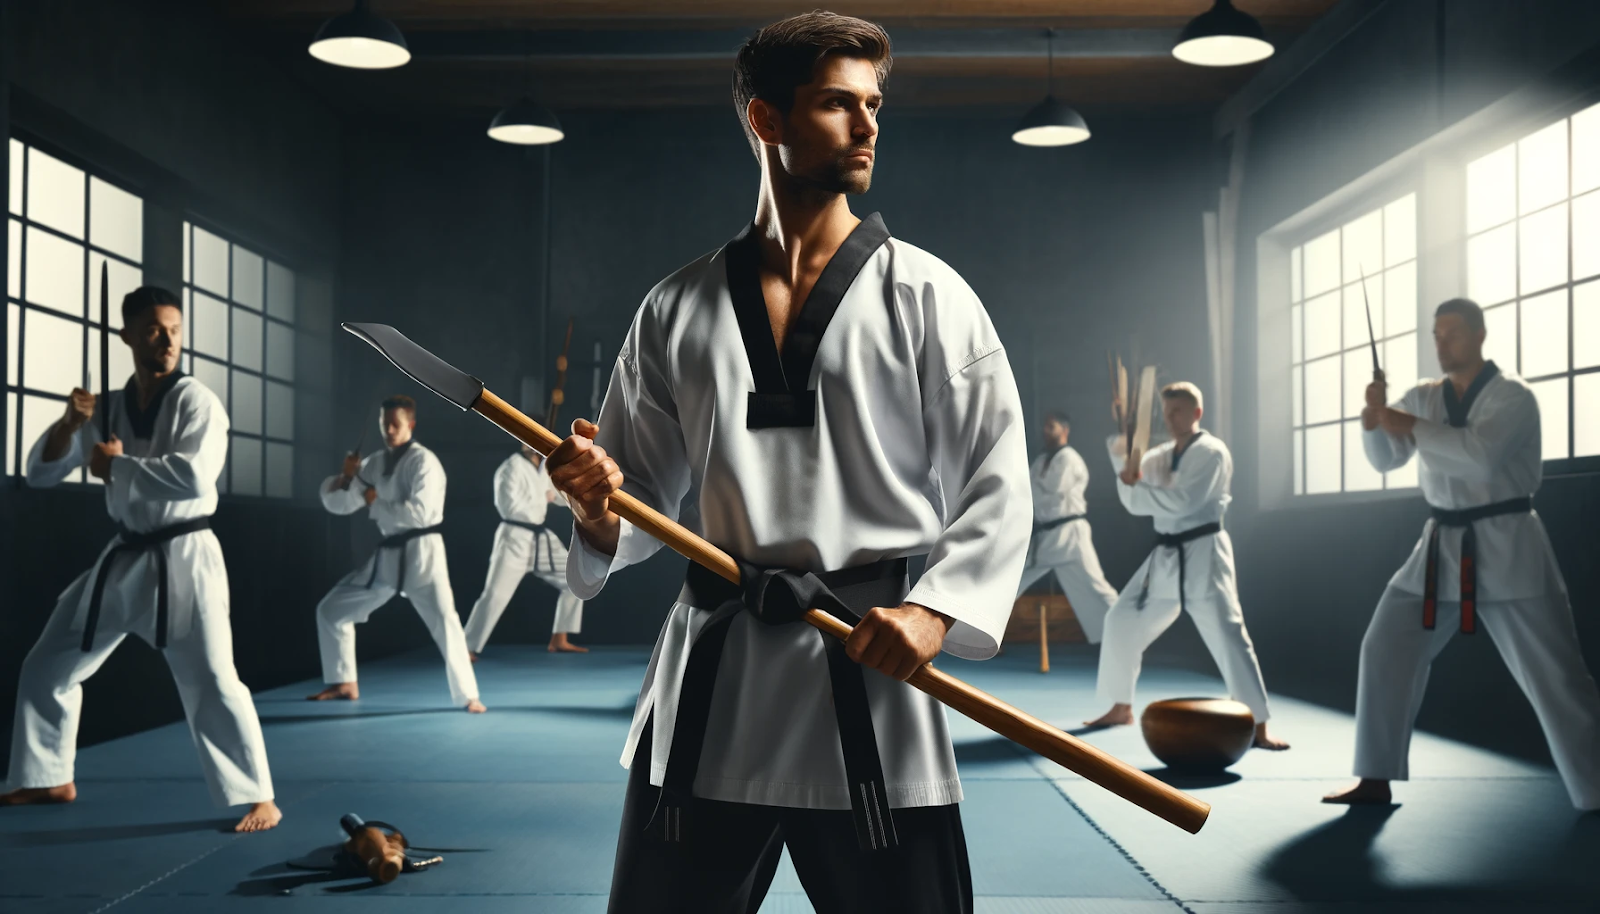 A group of taekwondo students holding various weapons.